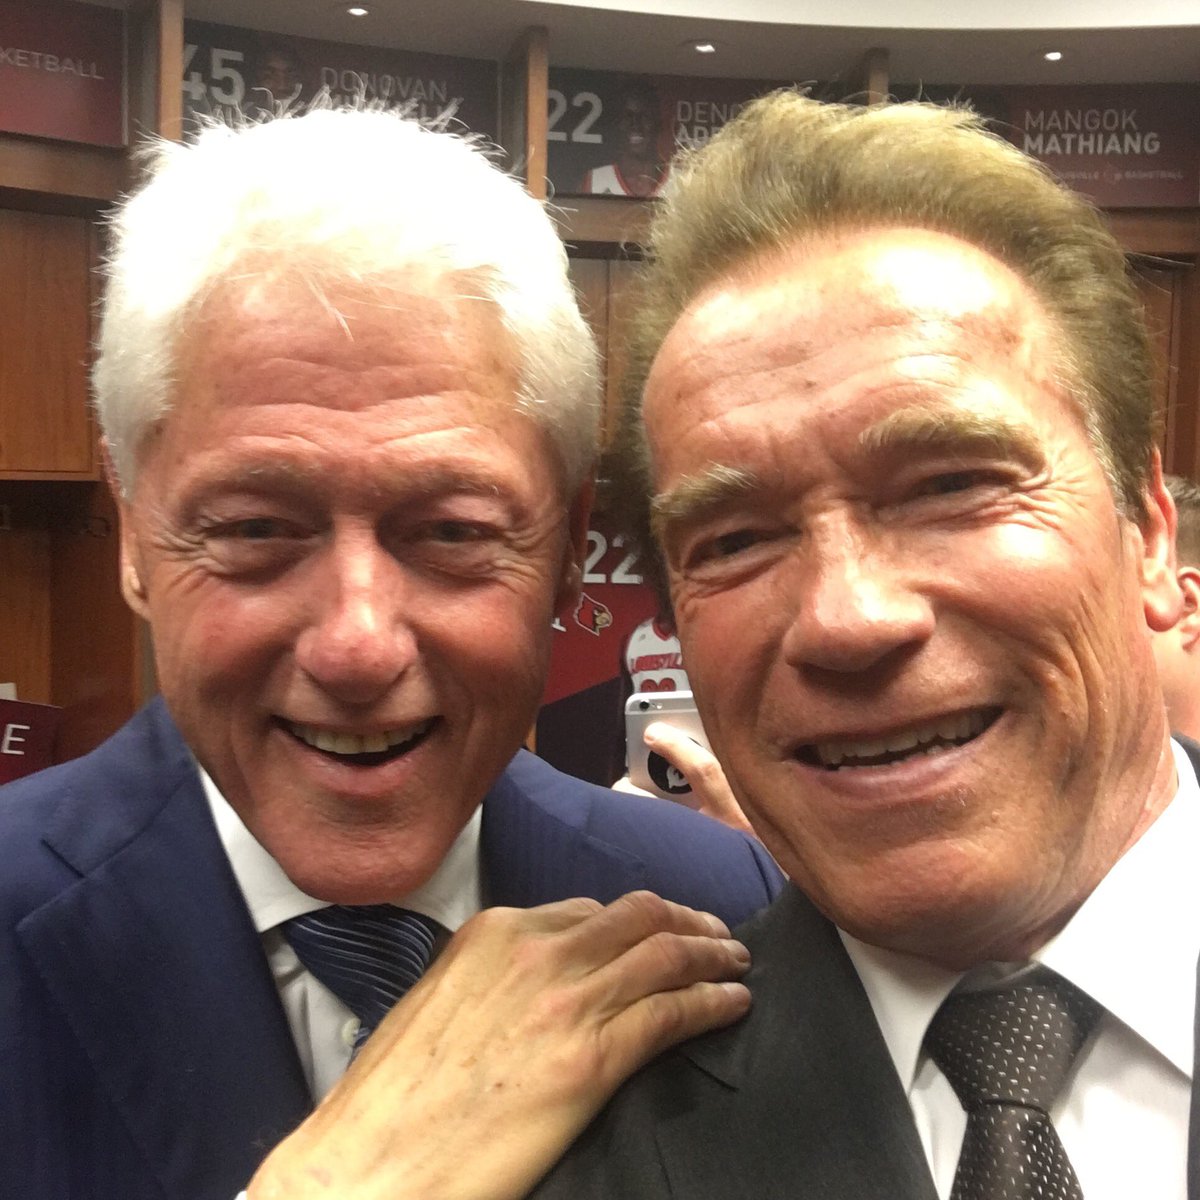 It was great to see my friend President @billclinton - who gave a fantastic eulogy of Muhammad Ali. https://t.co/nNoHwG1OJ3